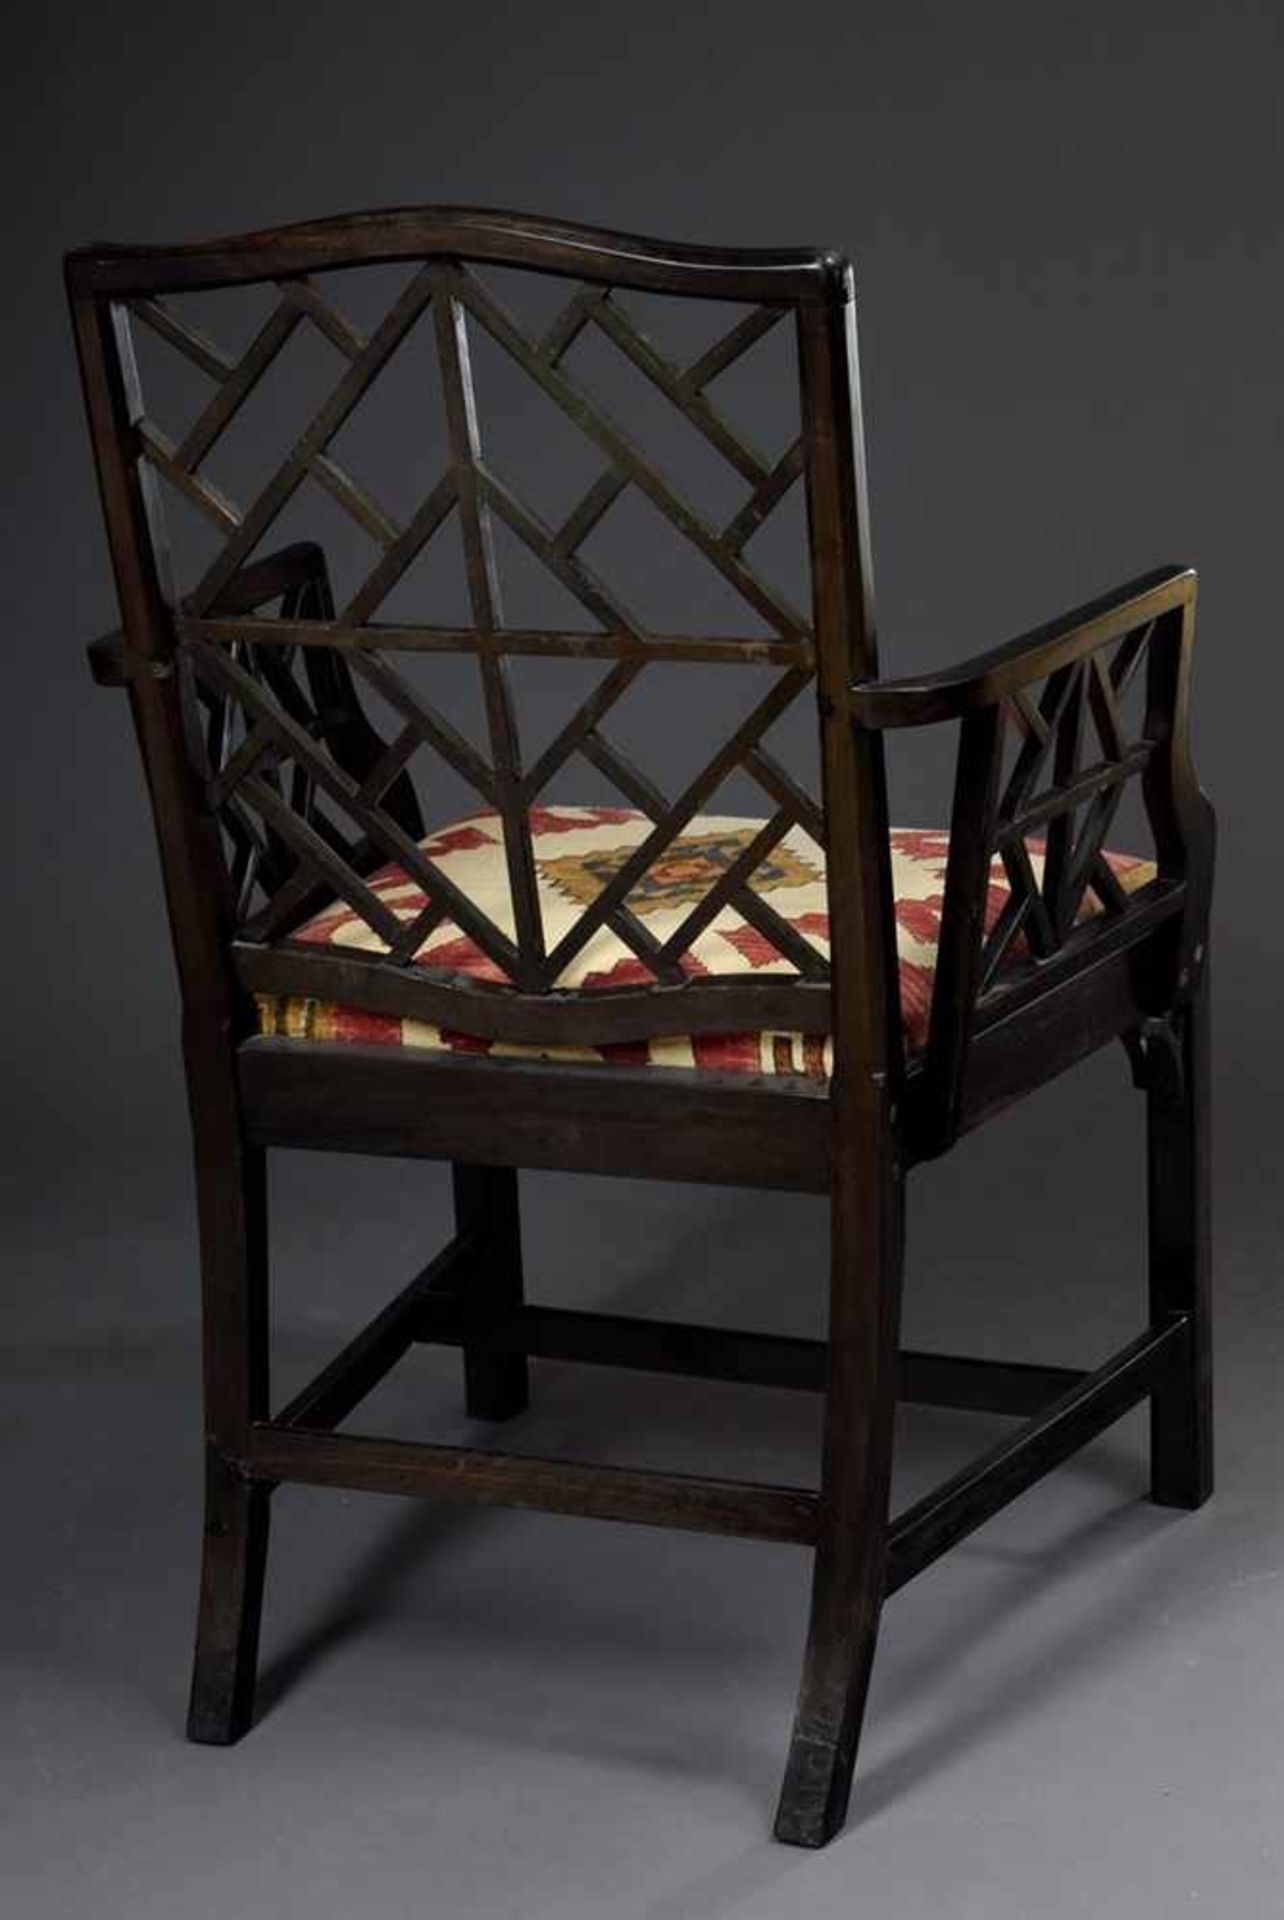 Ebony armchair in Chinese style designed by Thomas Chippendale, George III, England 2nd half 18th - Image 4 of 6